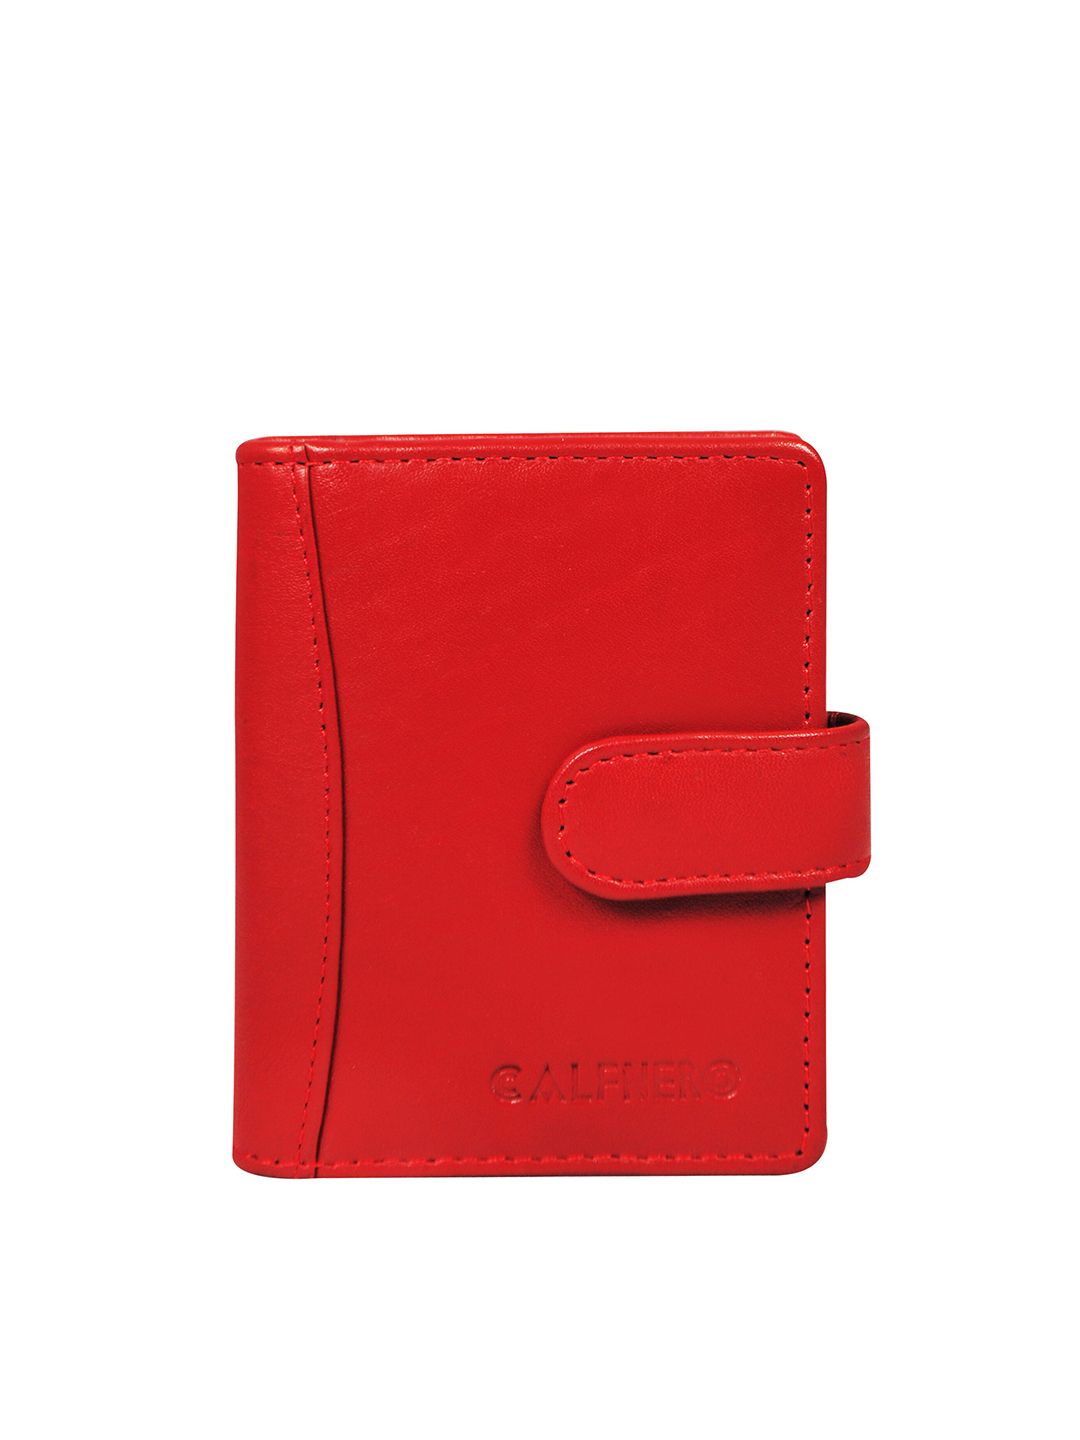 CALFNERO Unisex Red Leather Card Holder Price in India